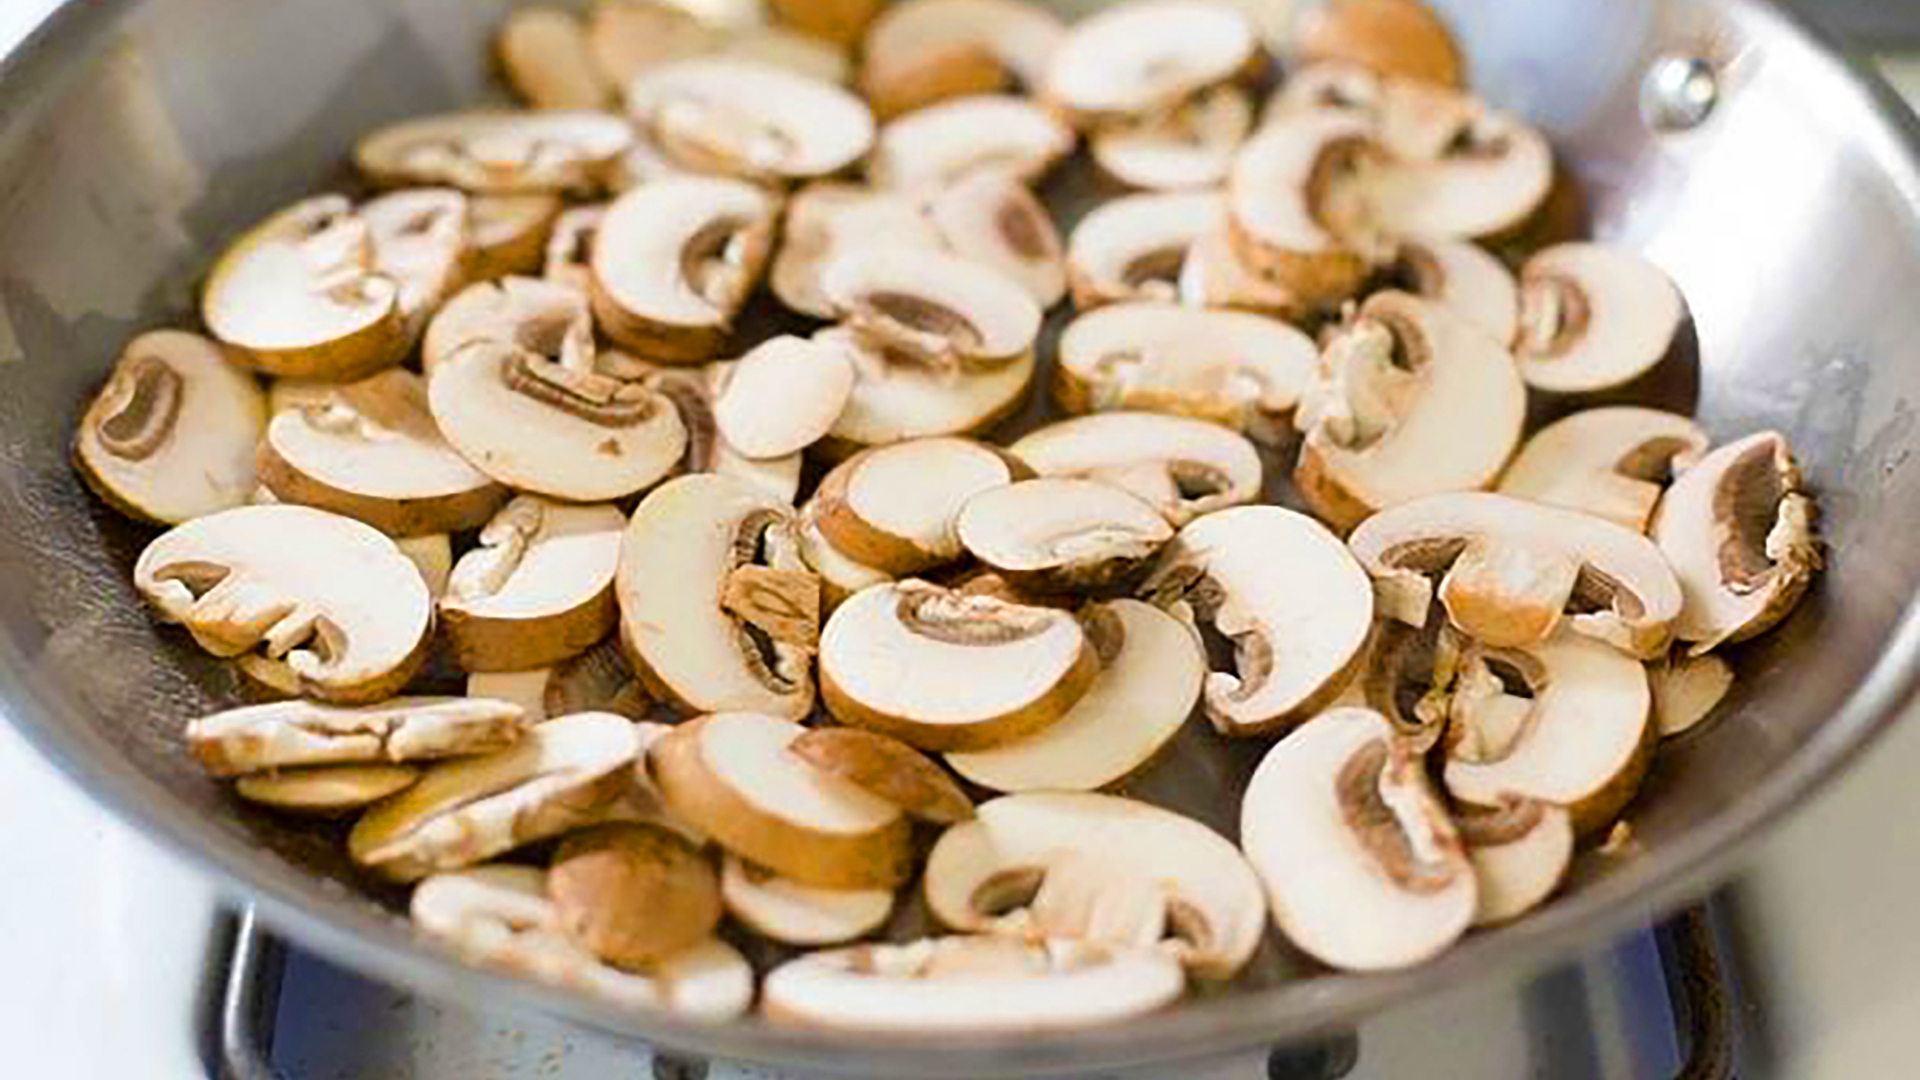 Chopped Canned Mushrooms